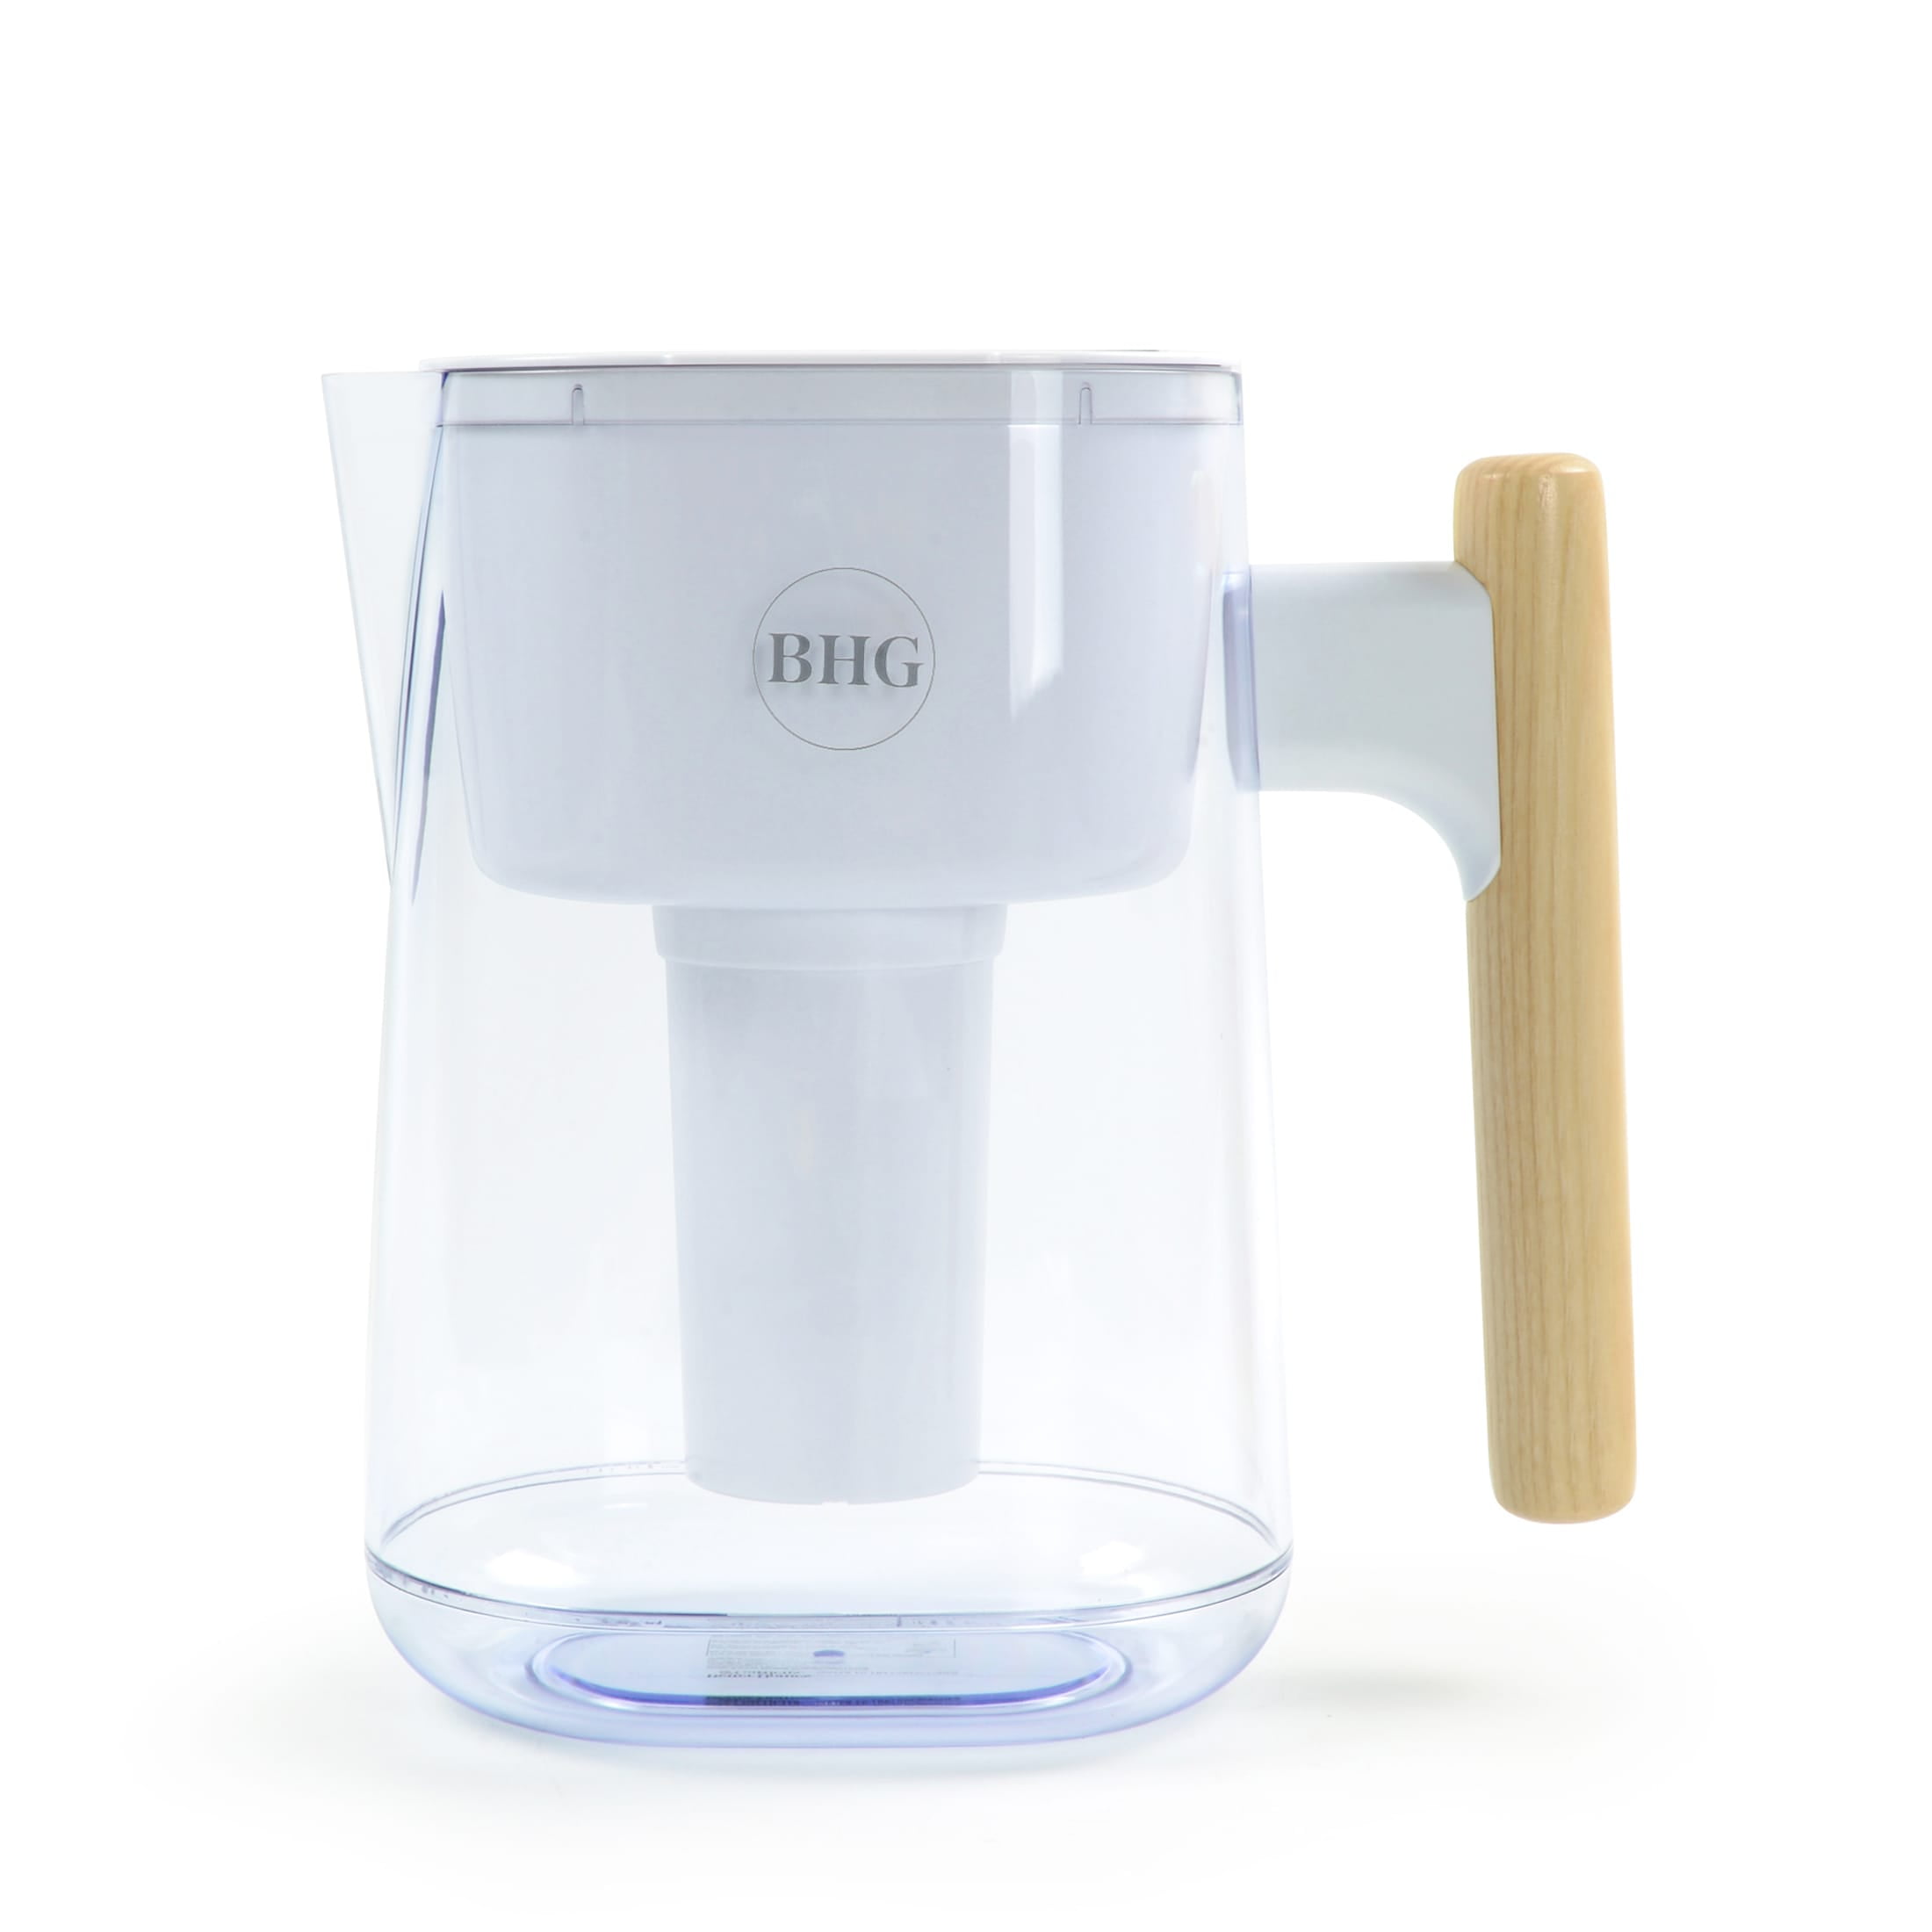 BHG Water Filter Pitcher, 7 Cup, Brita Compatible, White, Wooden Handle -  Size: 9x5x9 inches 